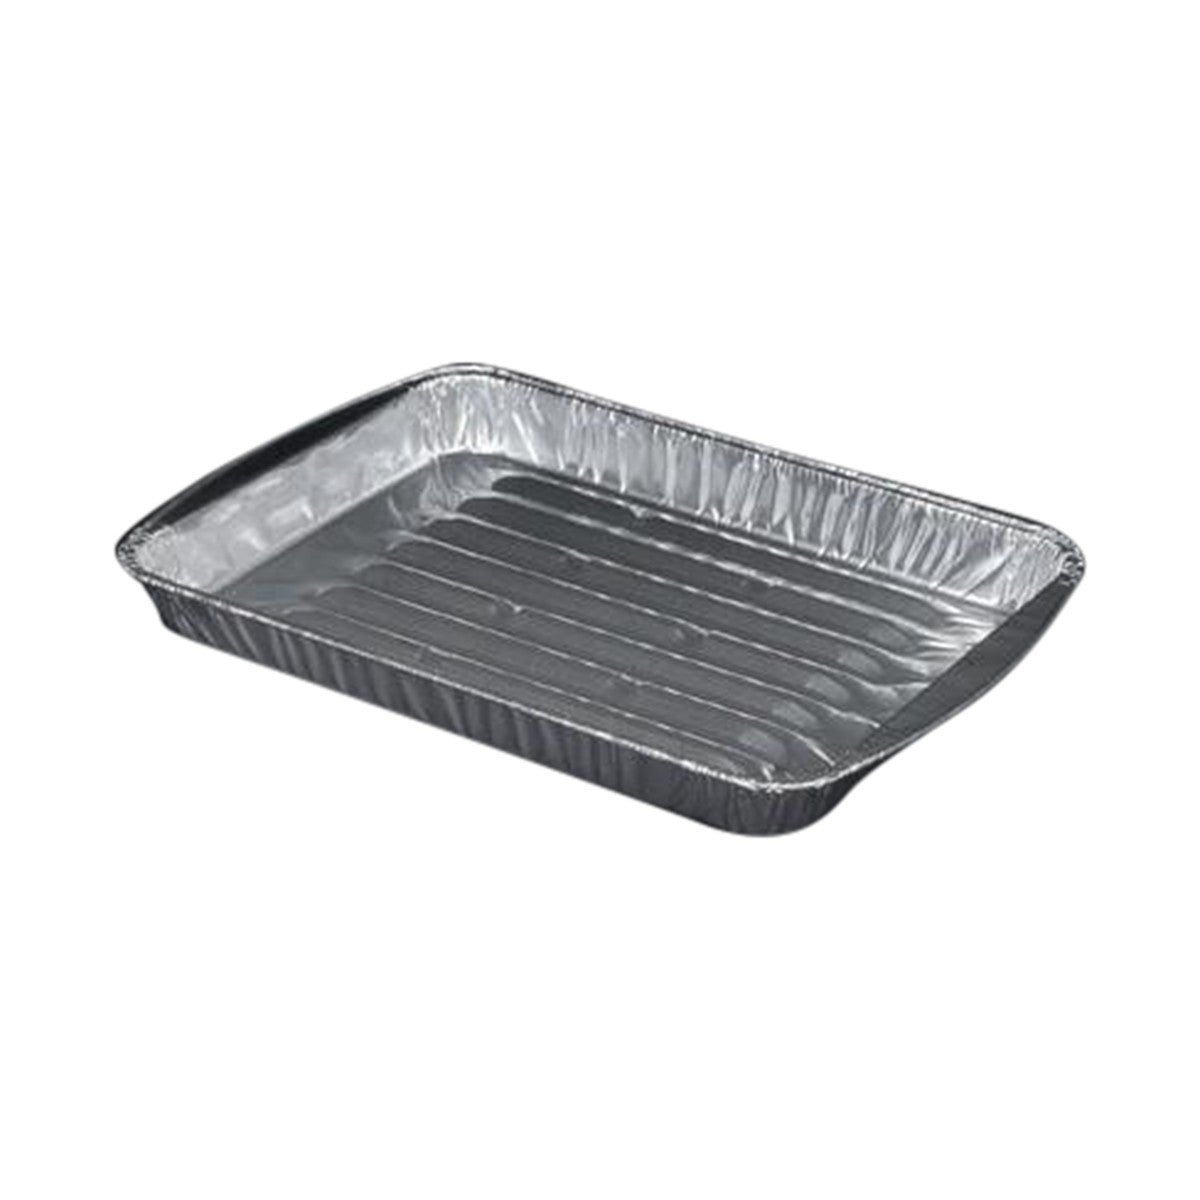 20 Pcs Aluminium Foil Trays Large Foil Food Trays with Lids Foil Baking  Trays Takeaway Tin Containers for Oven Roasting Broiling Cooking -  Walmart.com